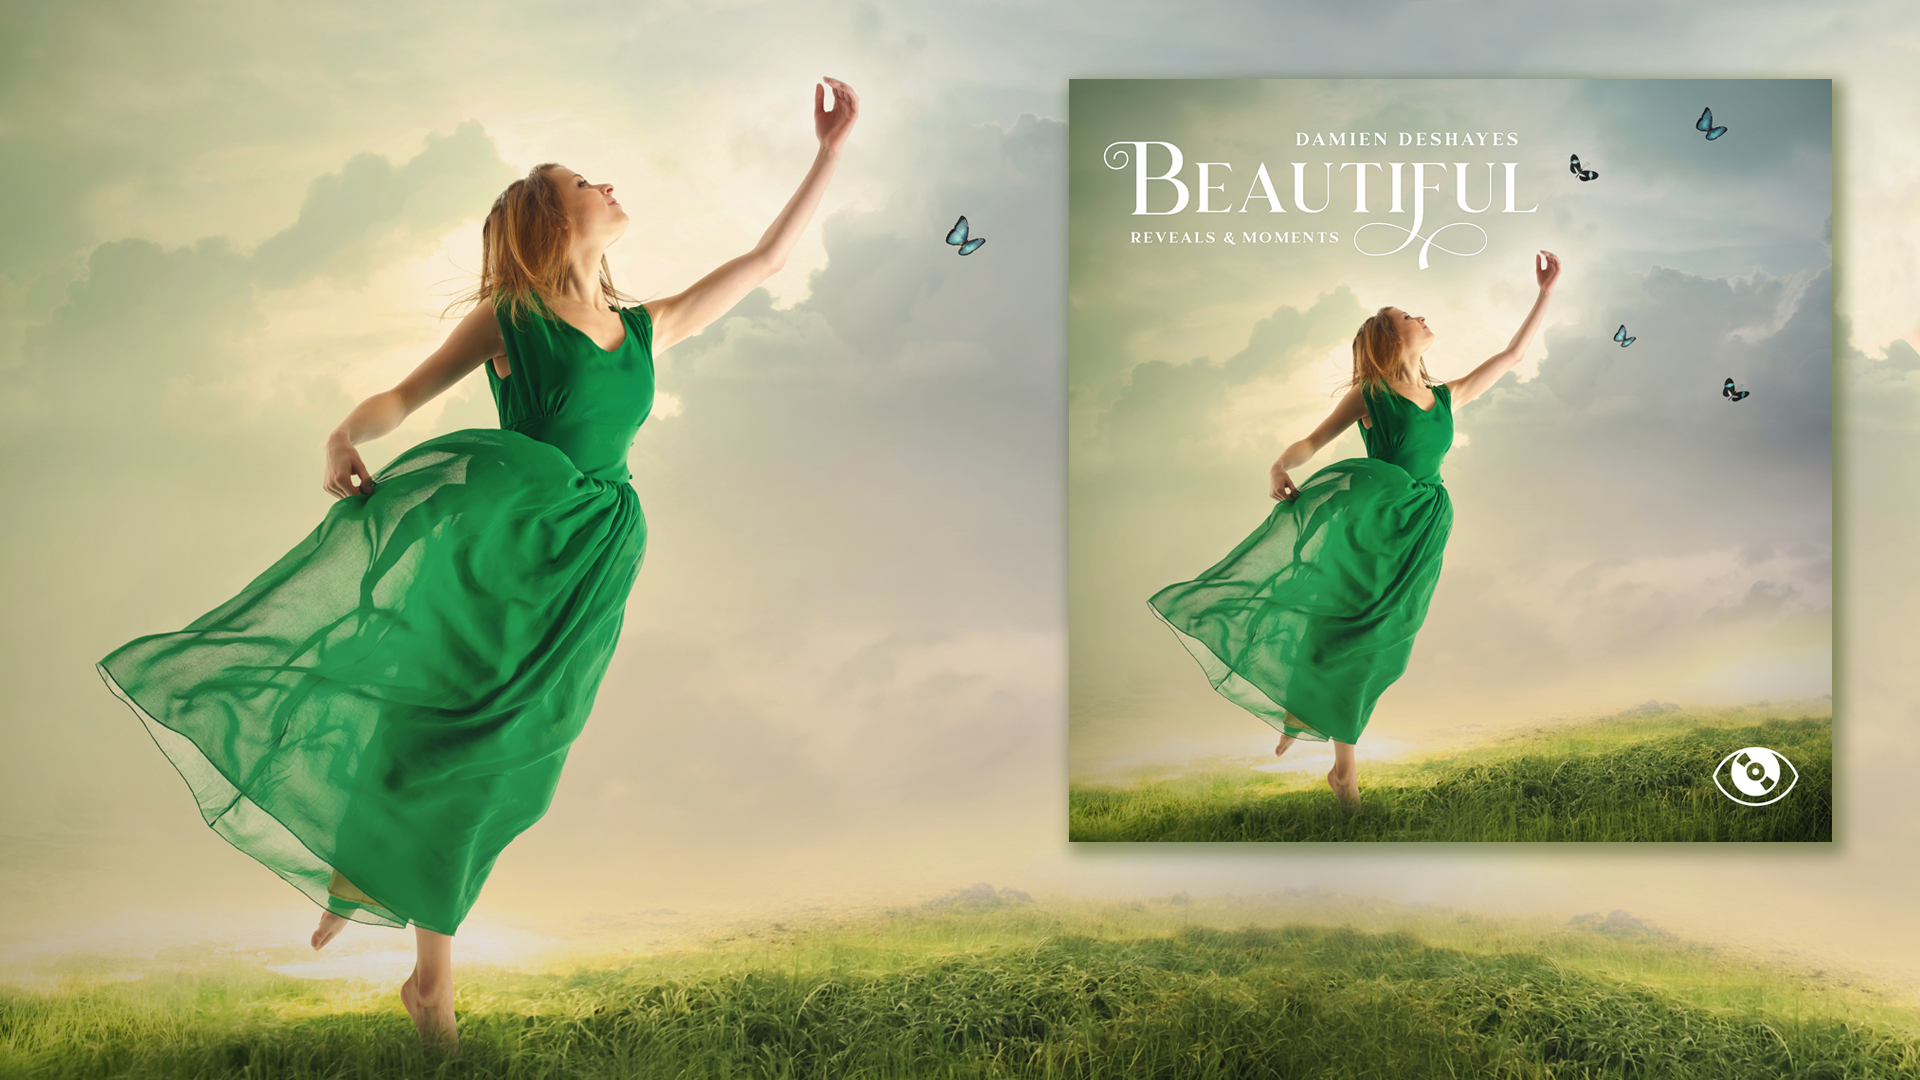 &#8220;Beautiful Reveals &#038; Moments&#8221; (BMG / Superpitch) is out now!